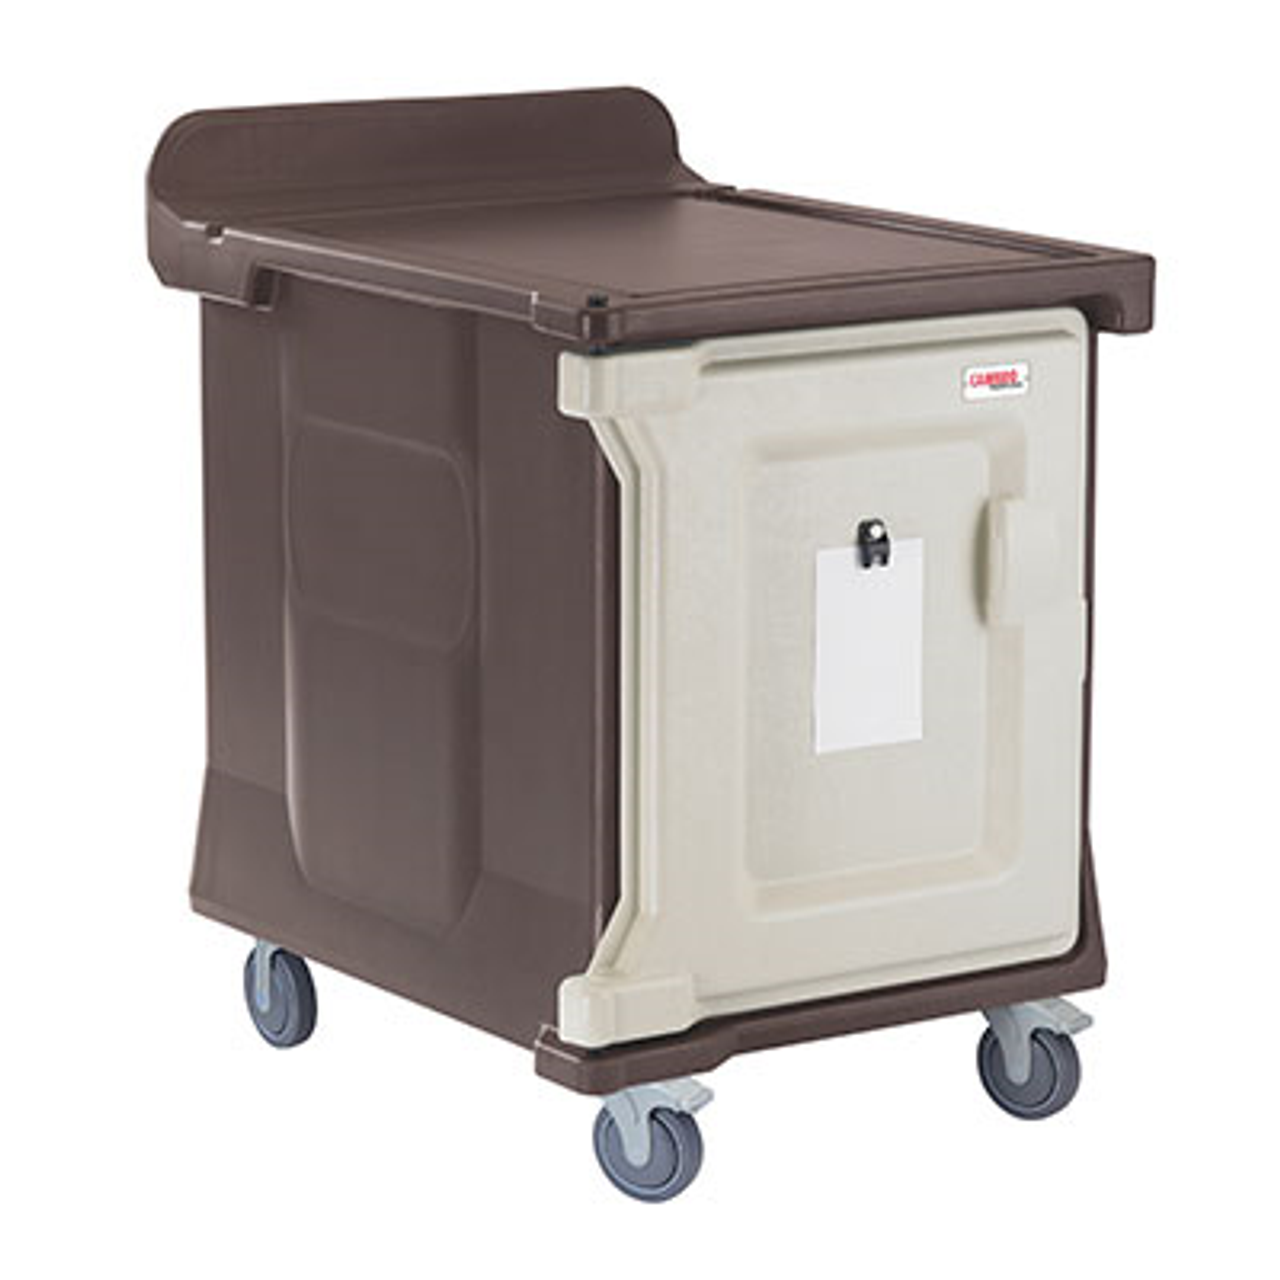 Meal Delivery Cart, low profile, (1) door, 1-compartment, holds (10) 15" x 20" trays, 29-1/2" x 38-1/2"D x 42-1/2"H, molded-in handle on the back, with louvered vent, 6" heavy duty casters (2 fixed, 2 swivel with brake, offset), granite sand with cream color door, NSF